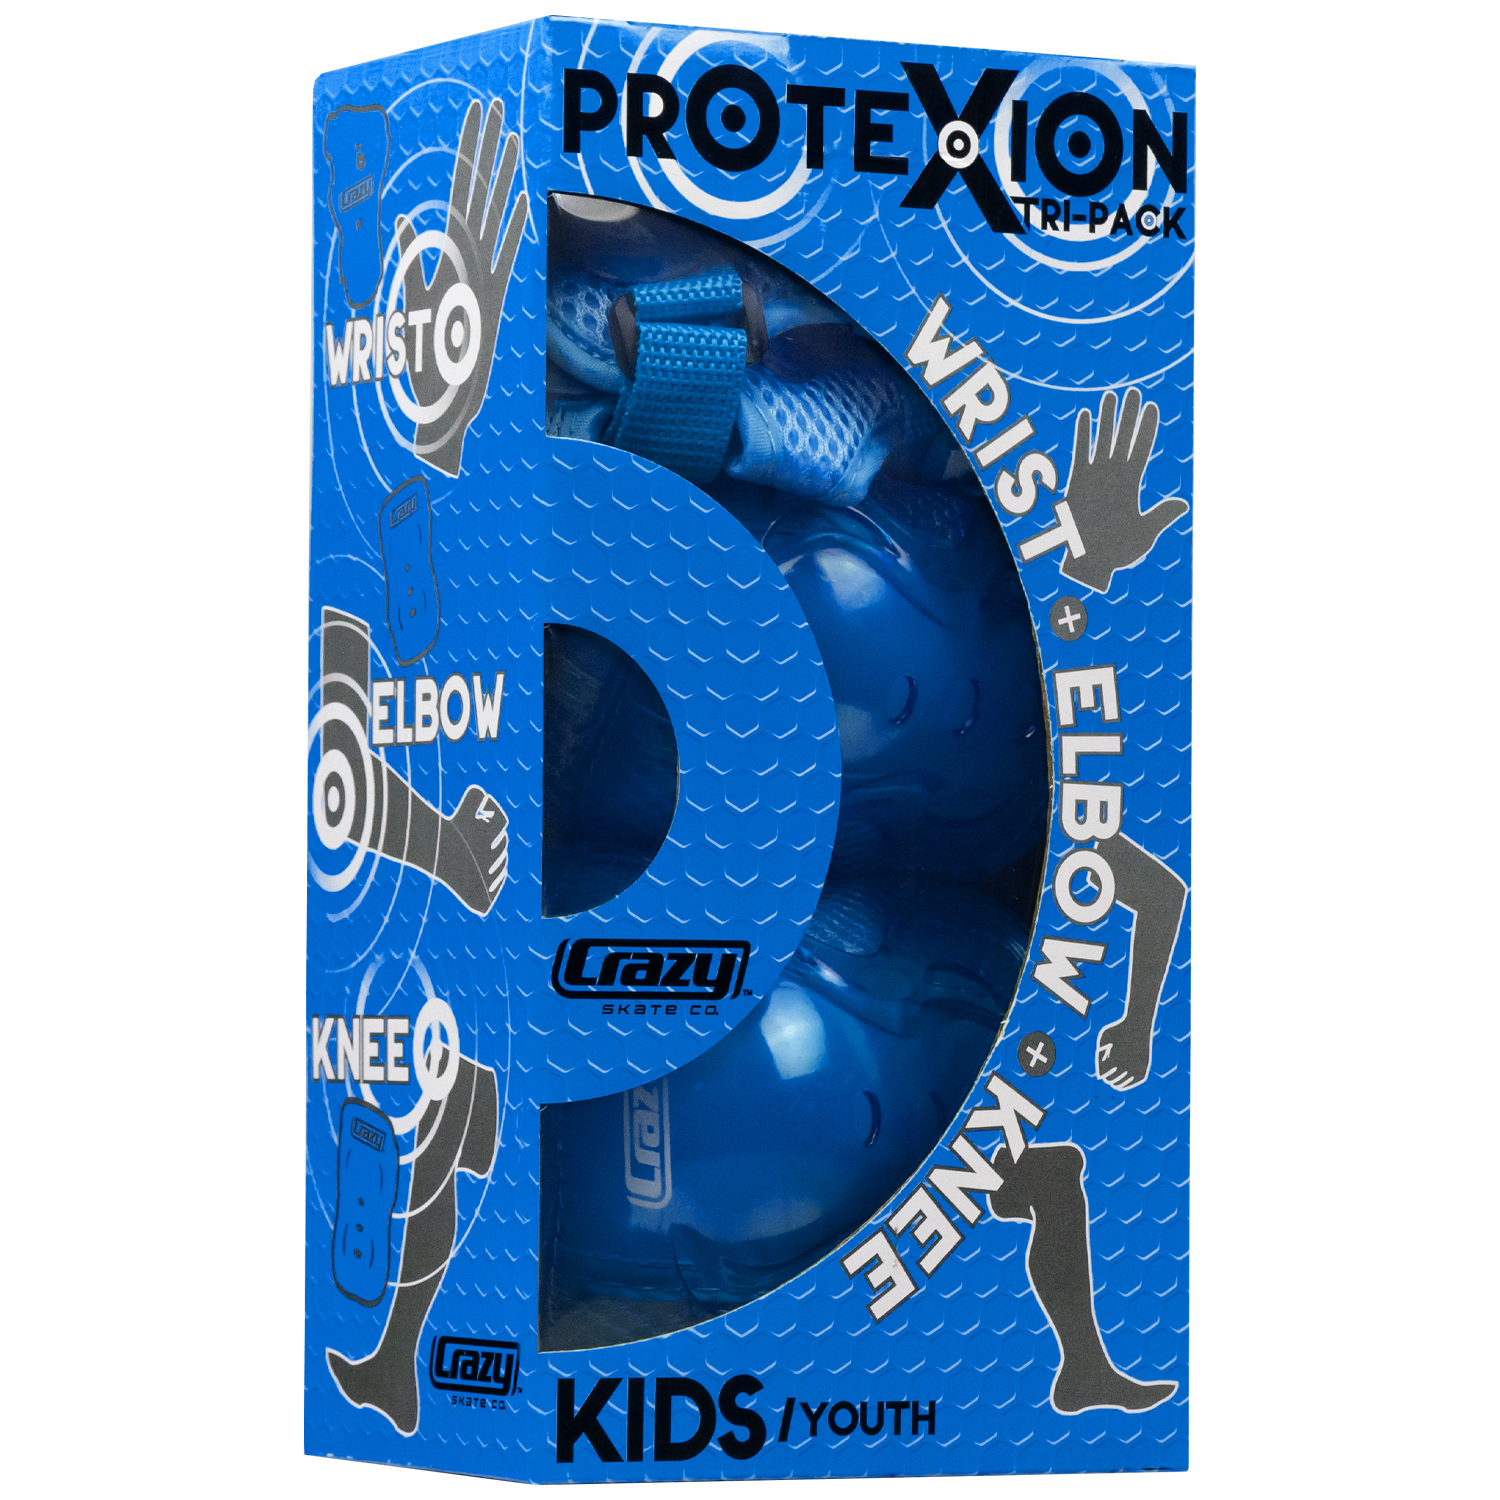 Includes Knee Crazy Skates Protexion Protective Gear Set for Kids Elbow and Wrist Pads 